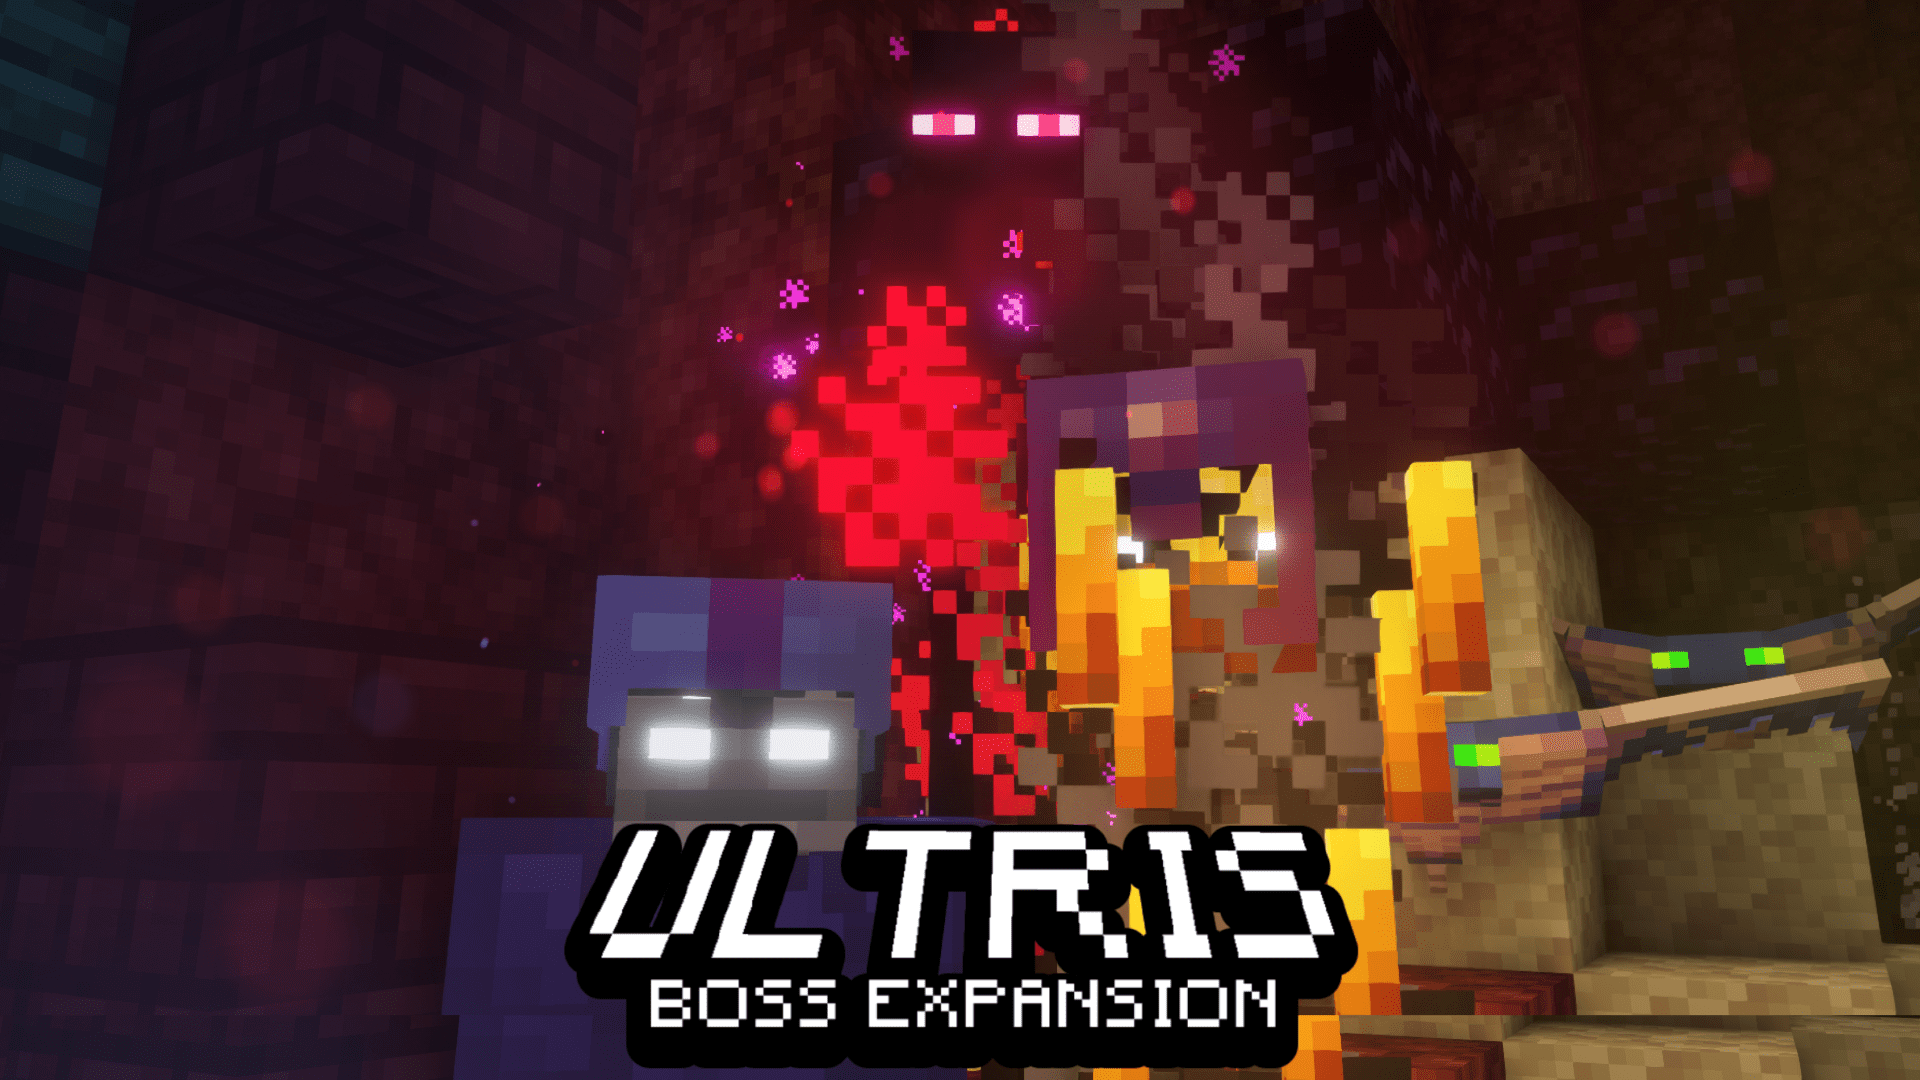 PickCrafter on X: Boss Rush Event is now available for a limited time! Get  these Boss Trophies! 🏆📷 #PickCrafter #BossRush #Seasonal #Event #Bosses  #Minecraft #LimitedTime  / X